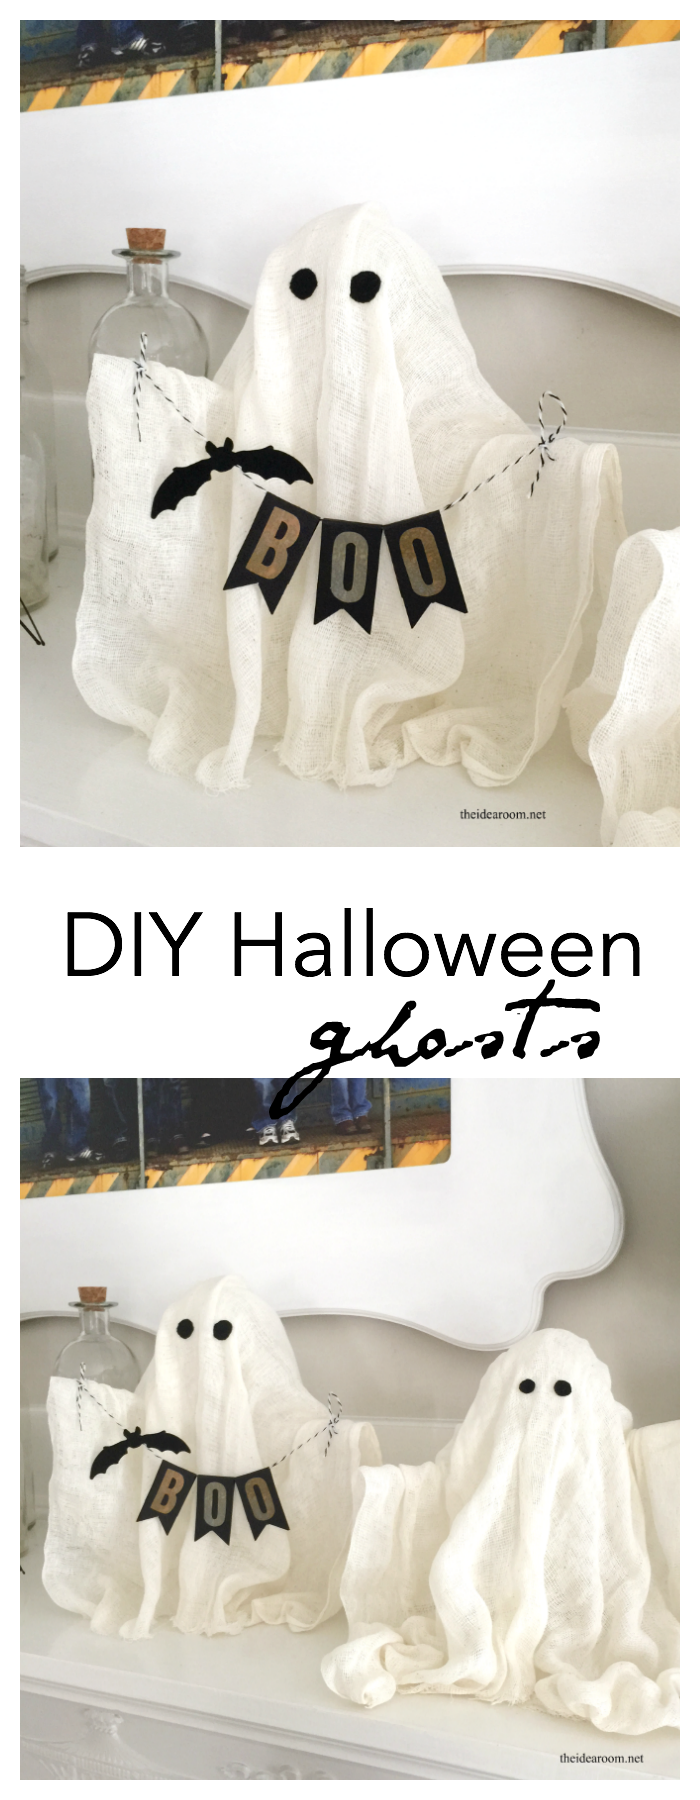 Craft Your Own Halloween Decorations with Knutselen